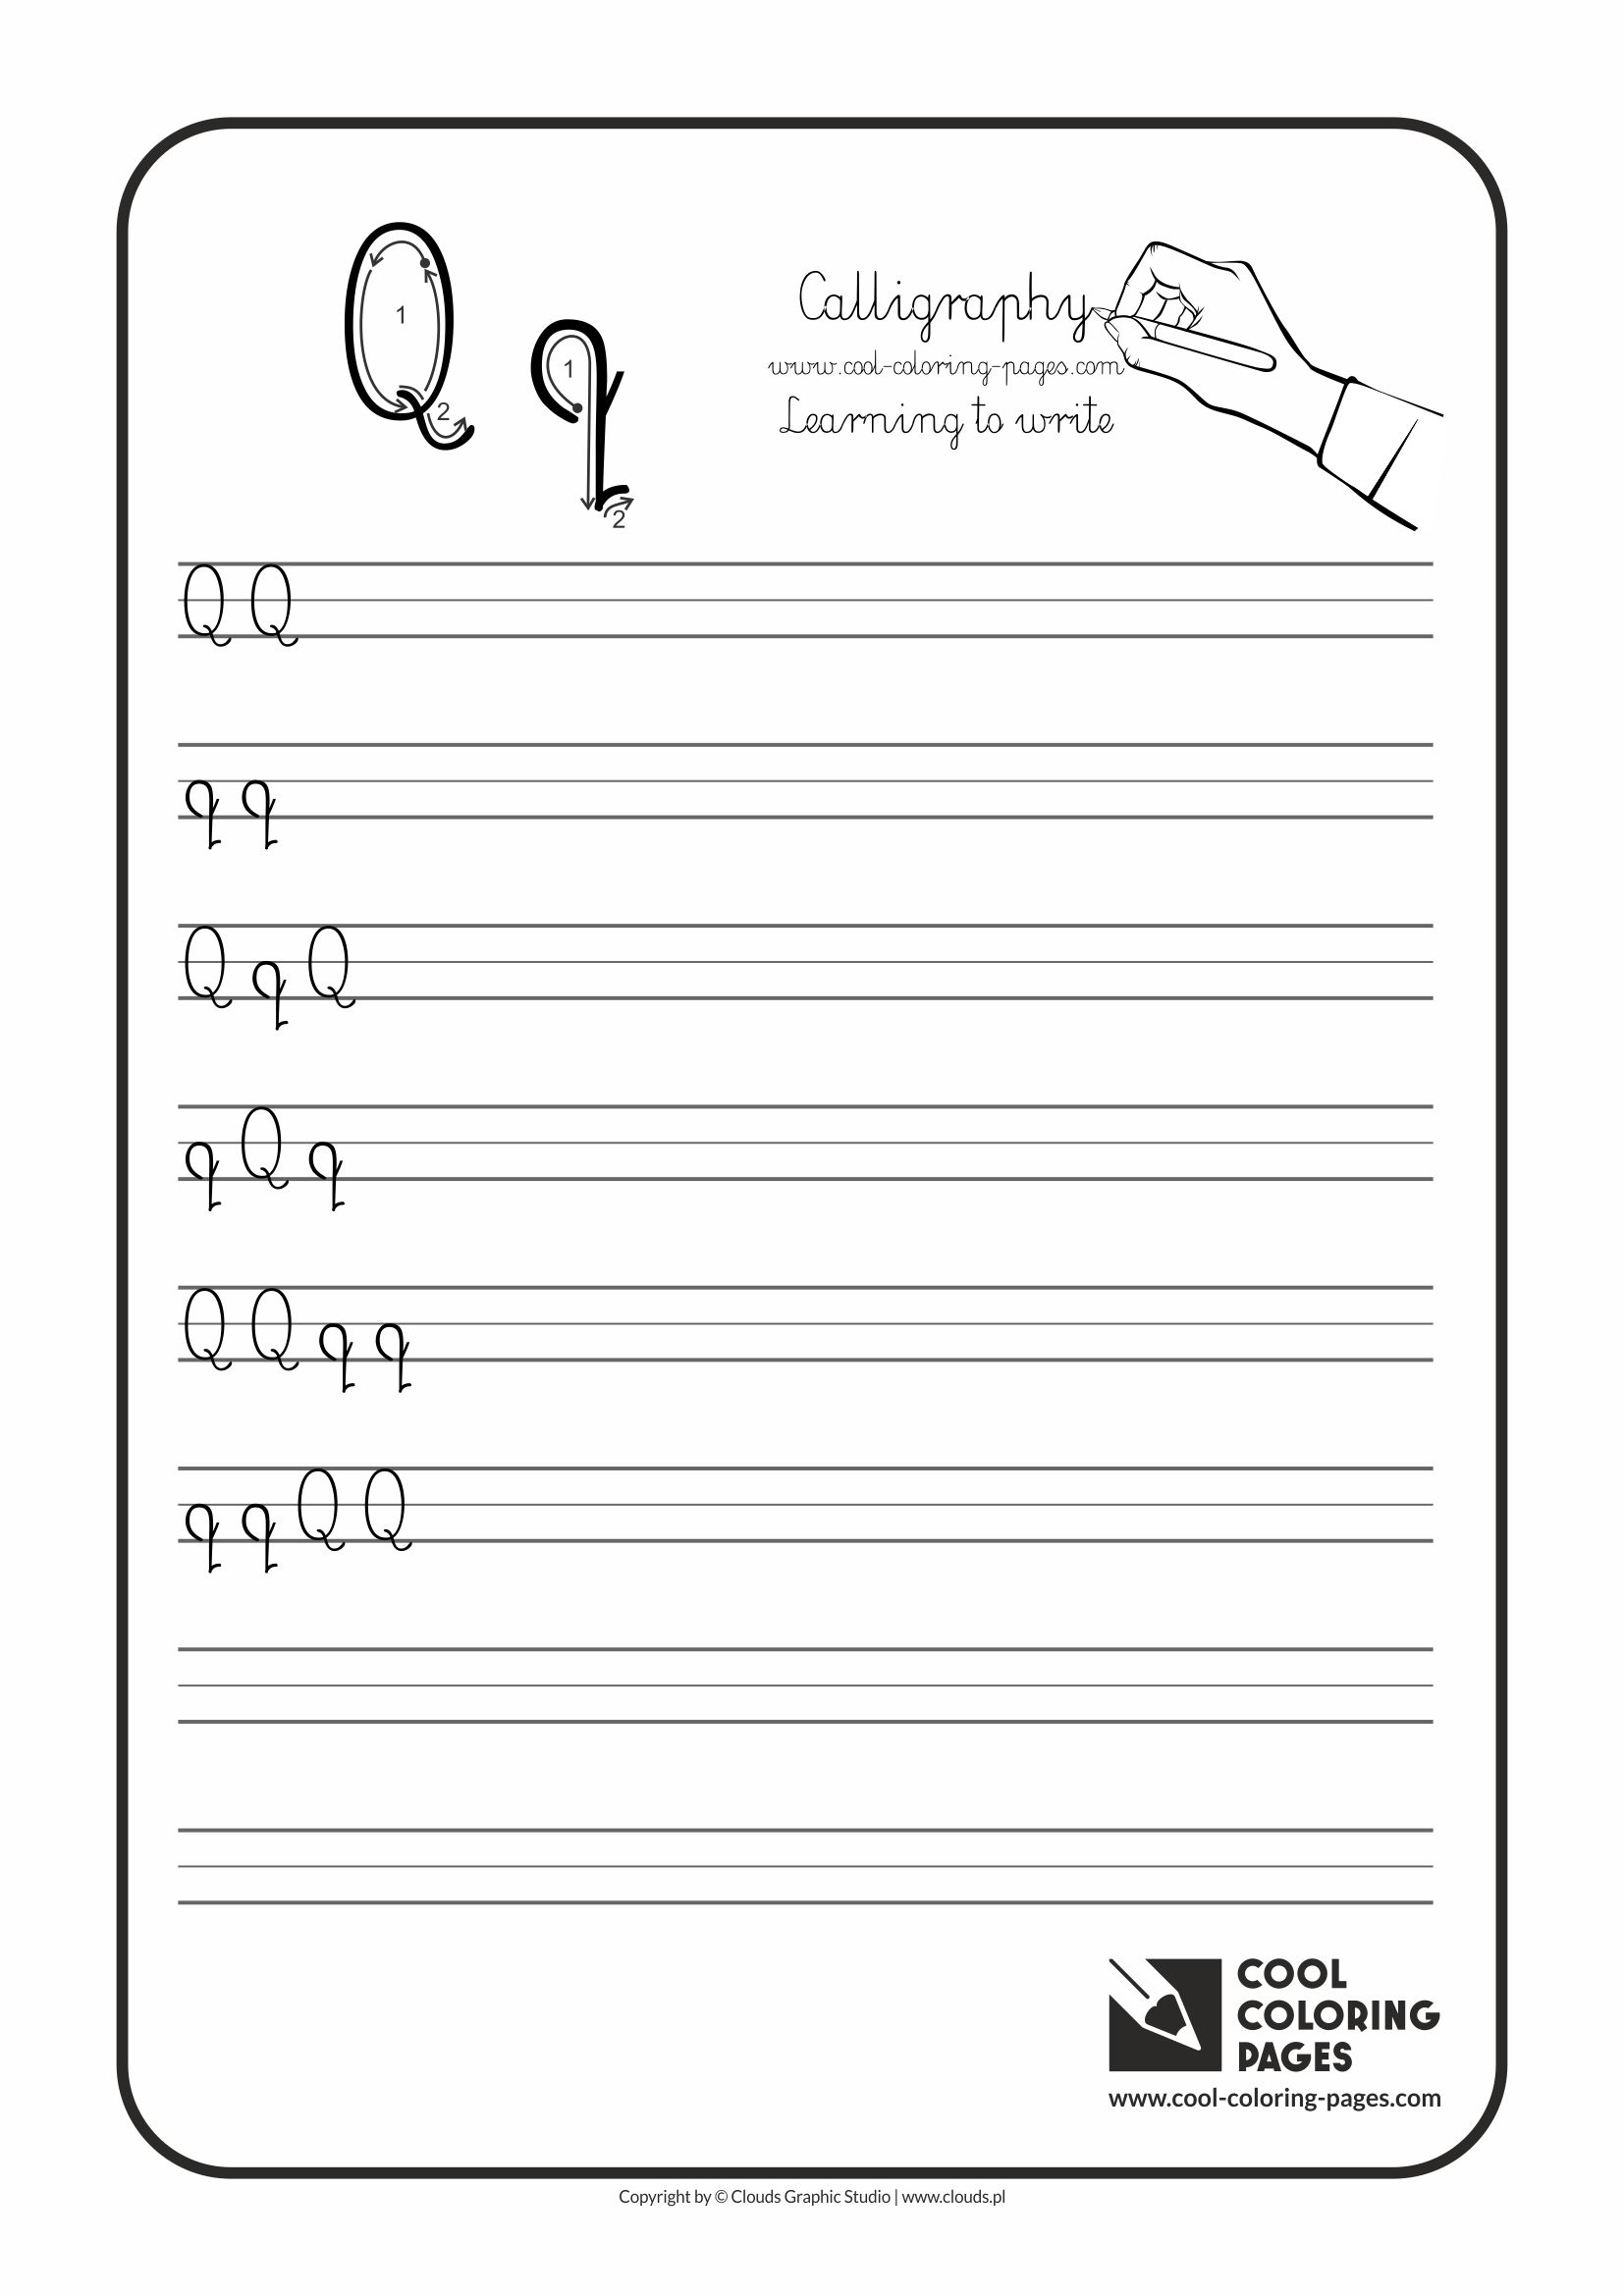 Cool Coloring Pages / Calligraphy / Letter Q - Handwriting for kids / Worksheets